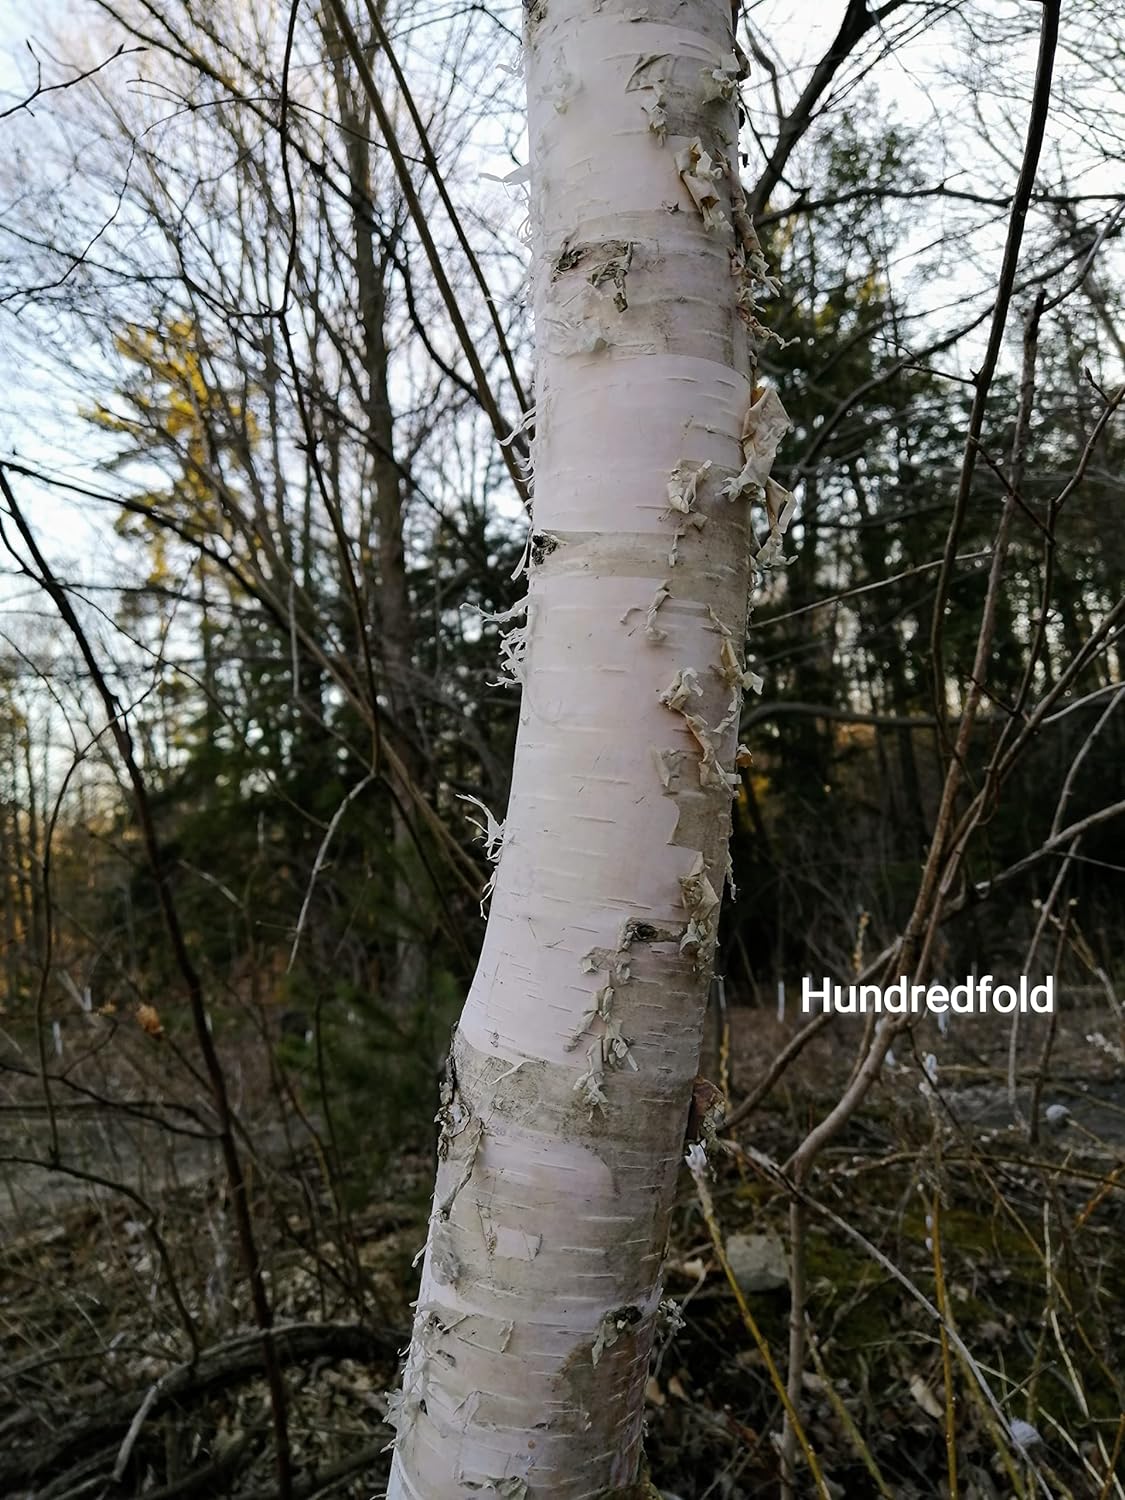 Paper Birch 50 Seeds - Betula papyrifera American White Birch, Canoe Birch Native Tree in Canada and USA, Excellent for Landscaping and Reforestation